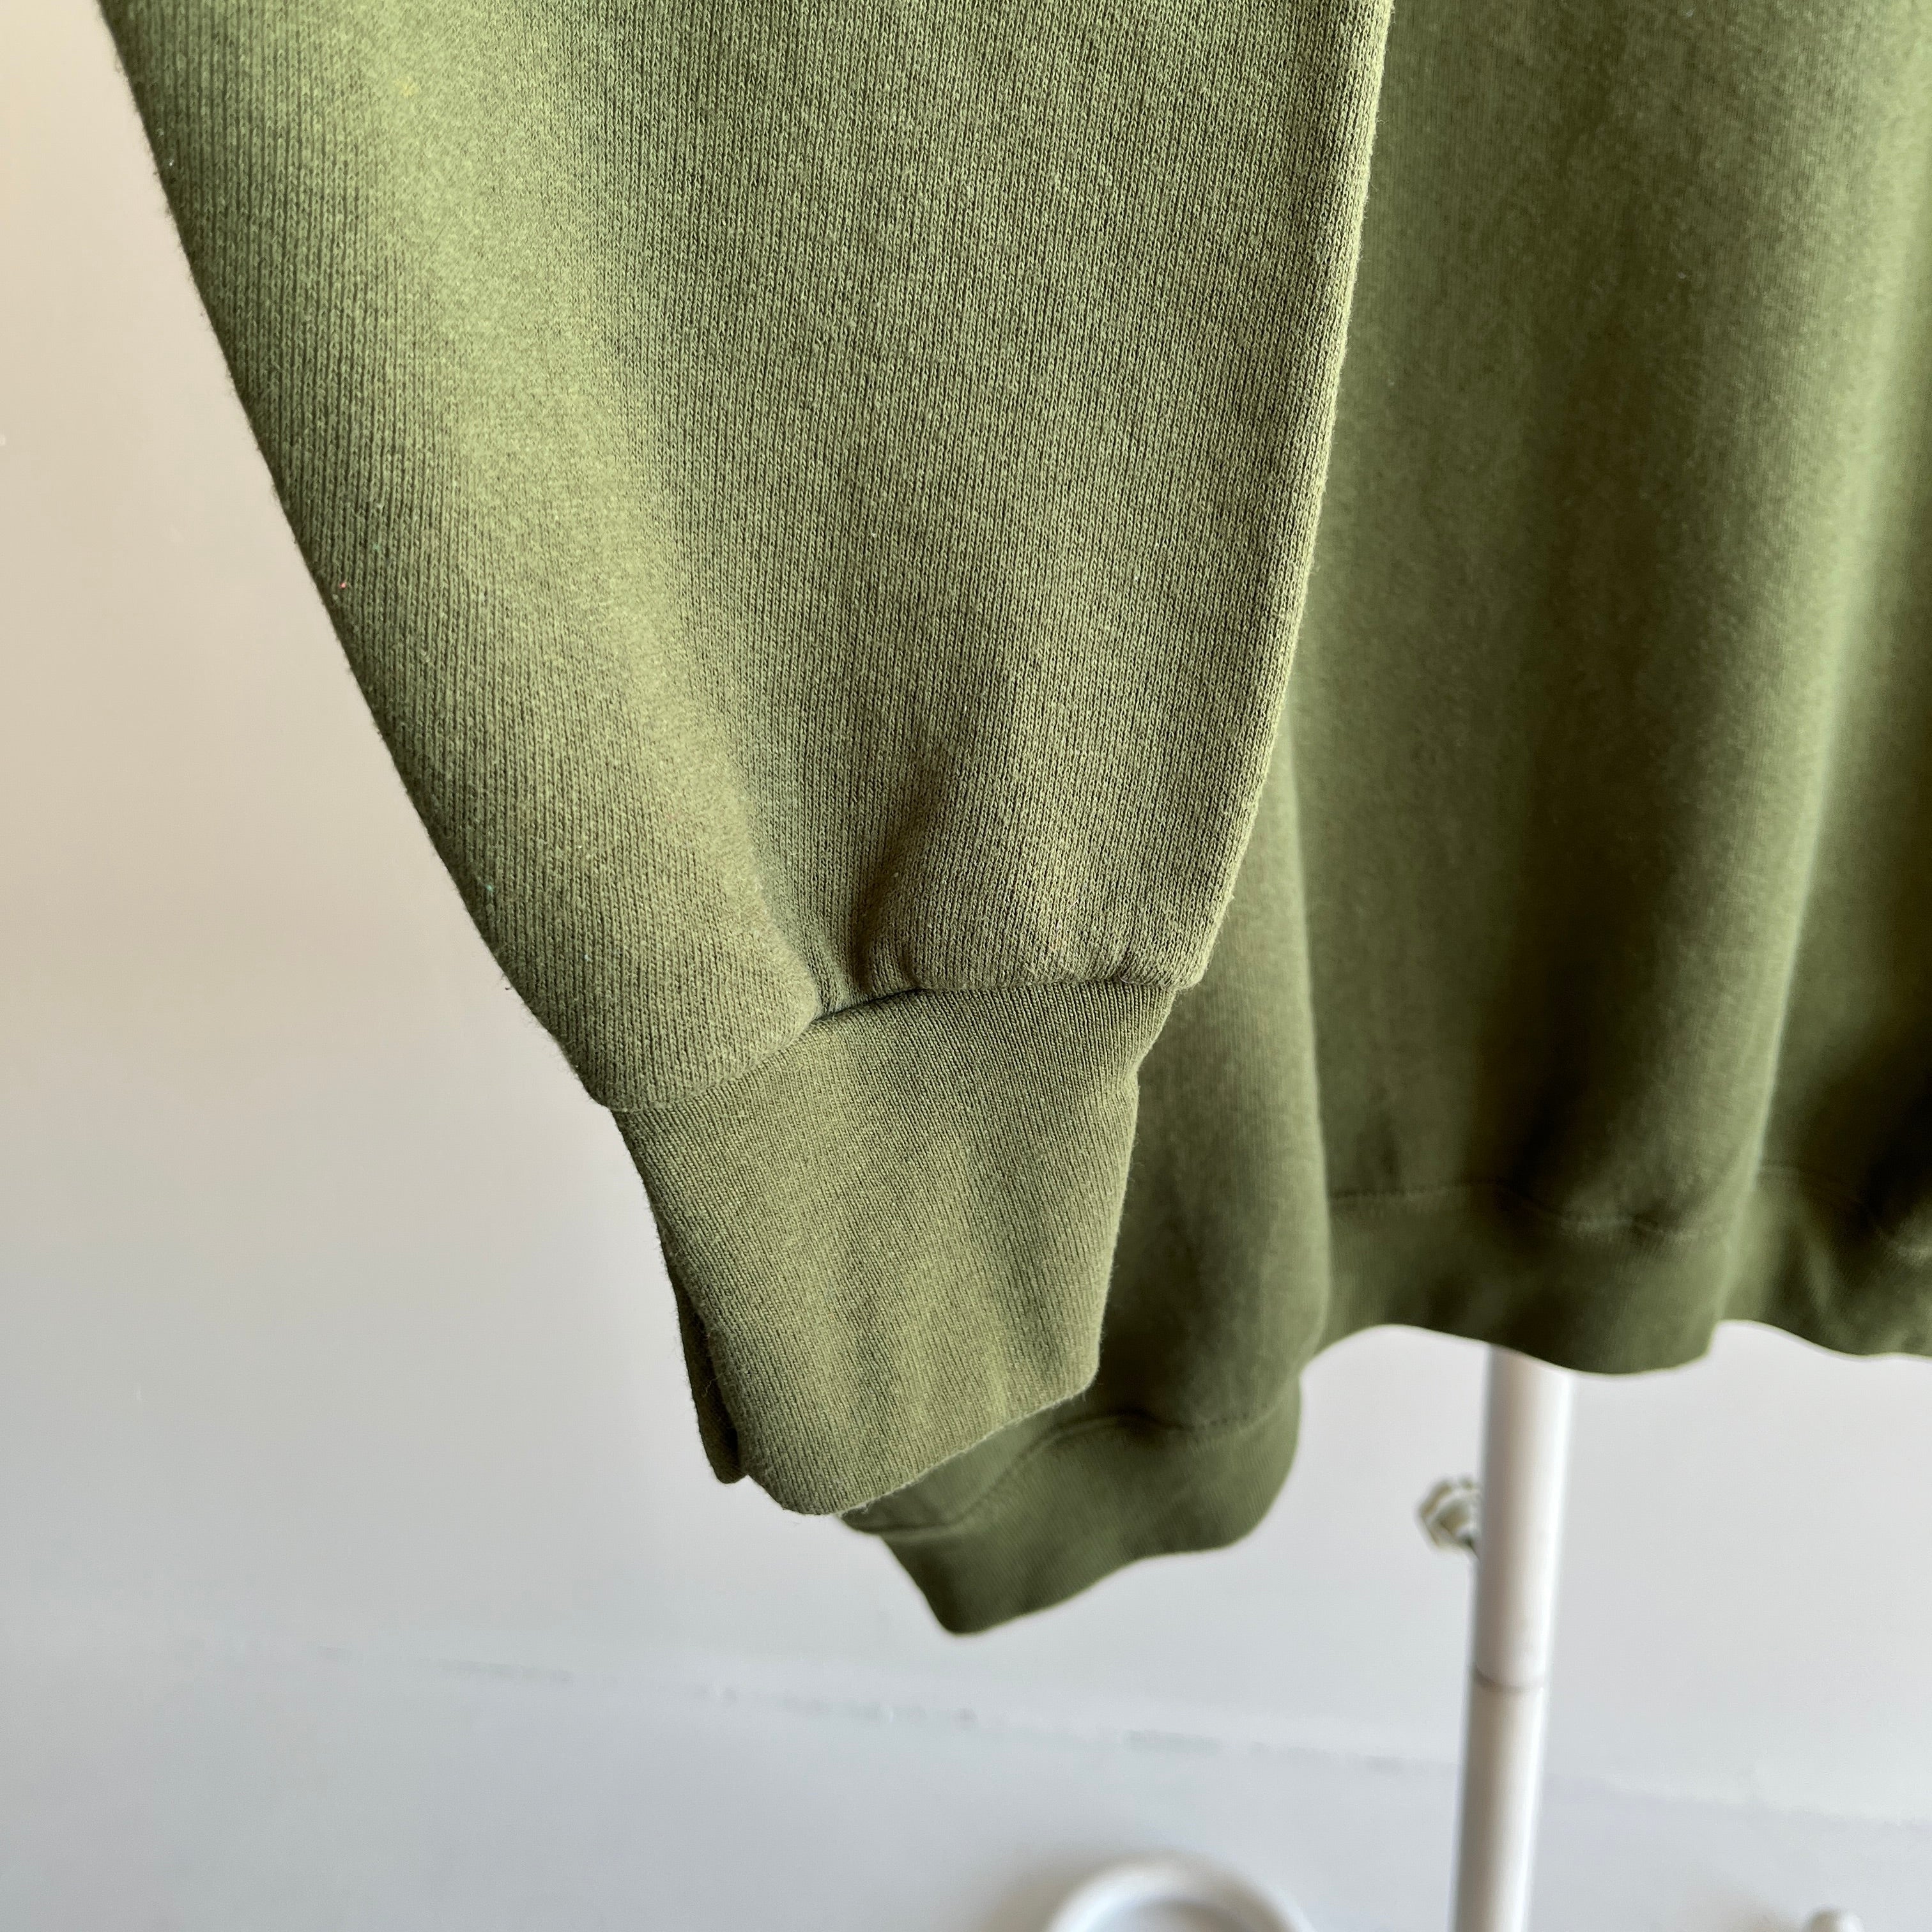 1980/90s Very Large and Boxy Olive Green Sweatshirt by FOTL